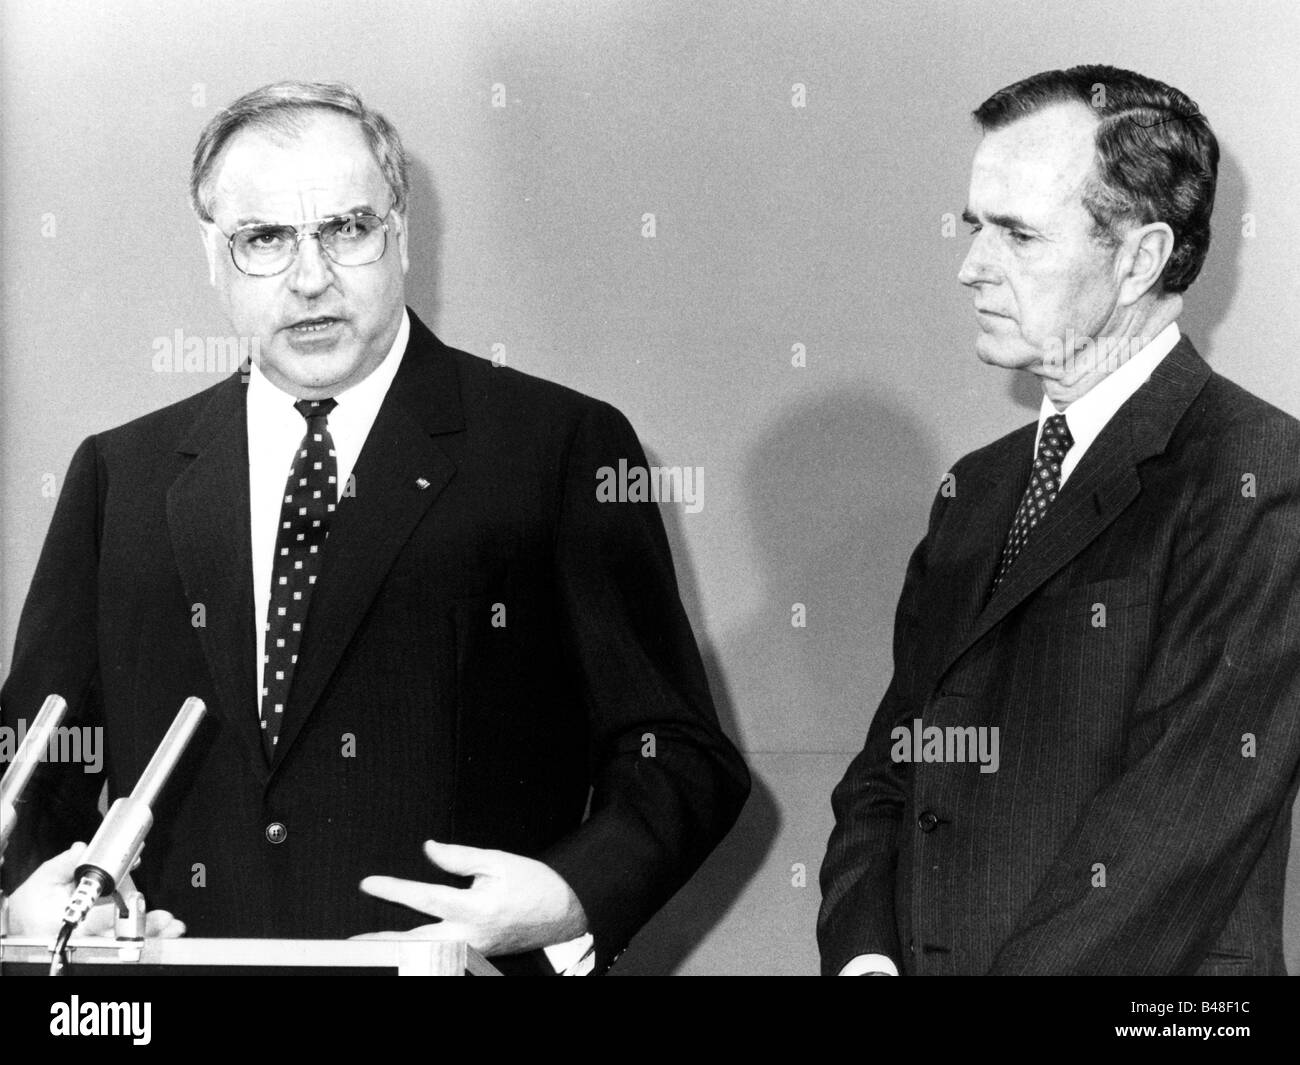 Kohl, Helmut, * 3.4.1930, German politician (CDU), chancellor of Germany 1982 - 1998, half length, with Vice President of the United States of America George Bush, press conference, Bonn, 31.1.1983, Stock Photo